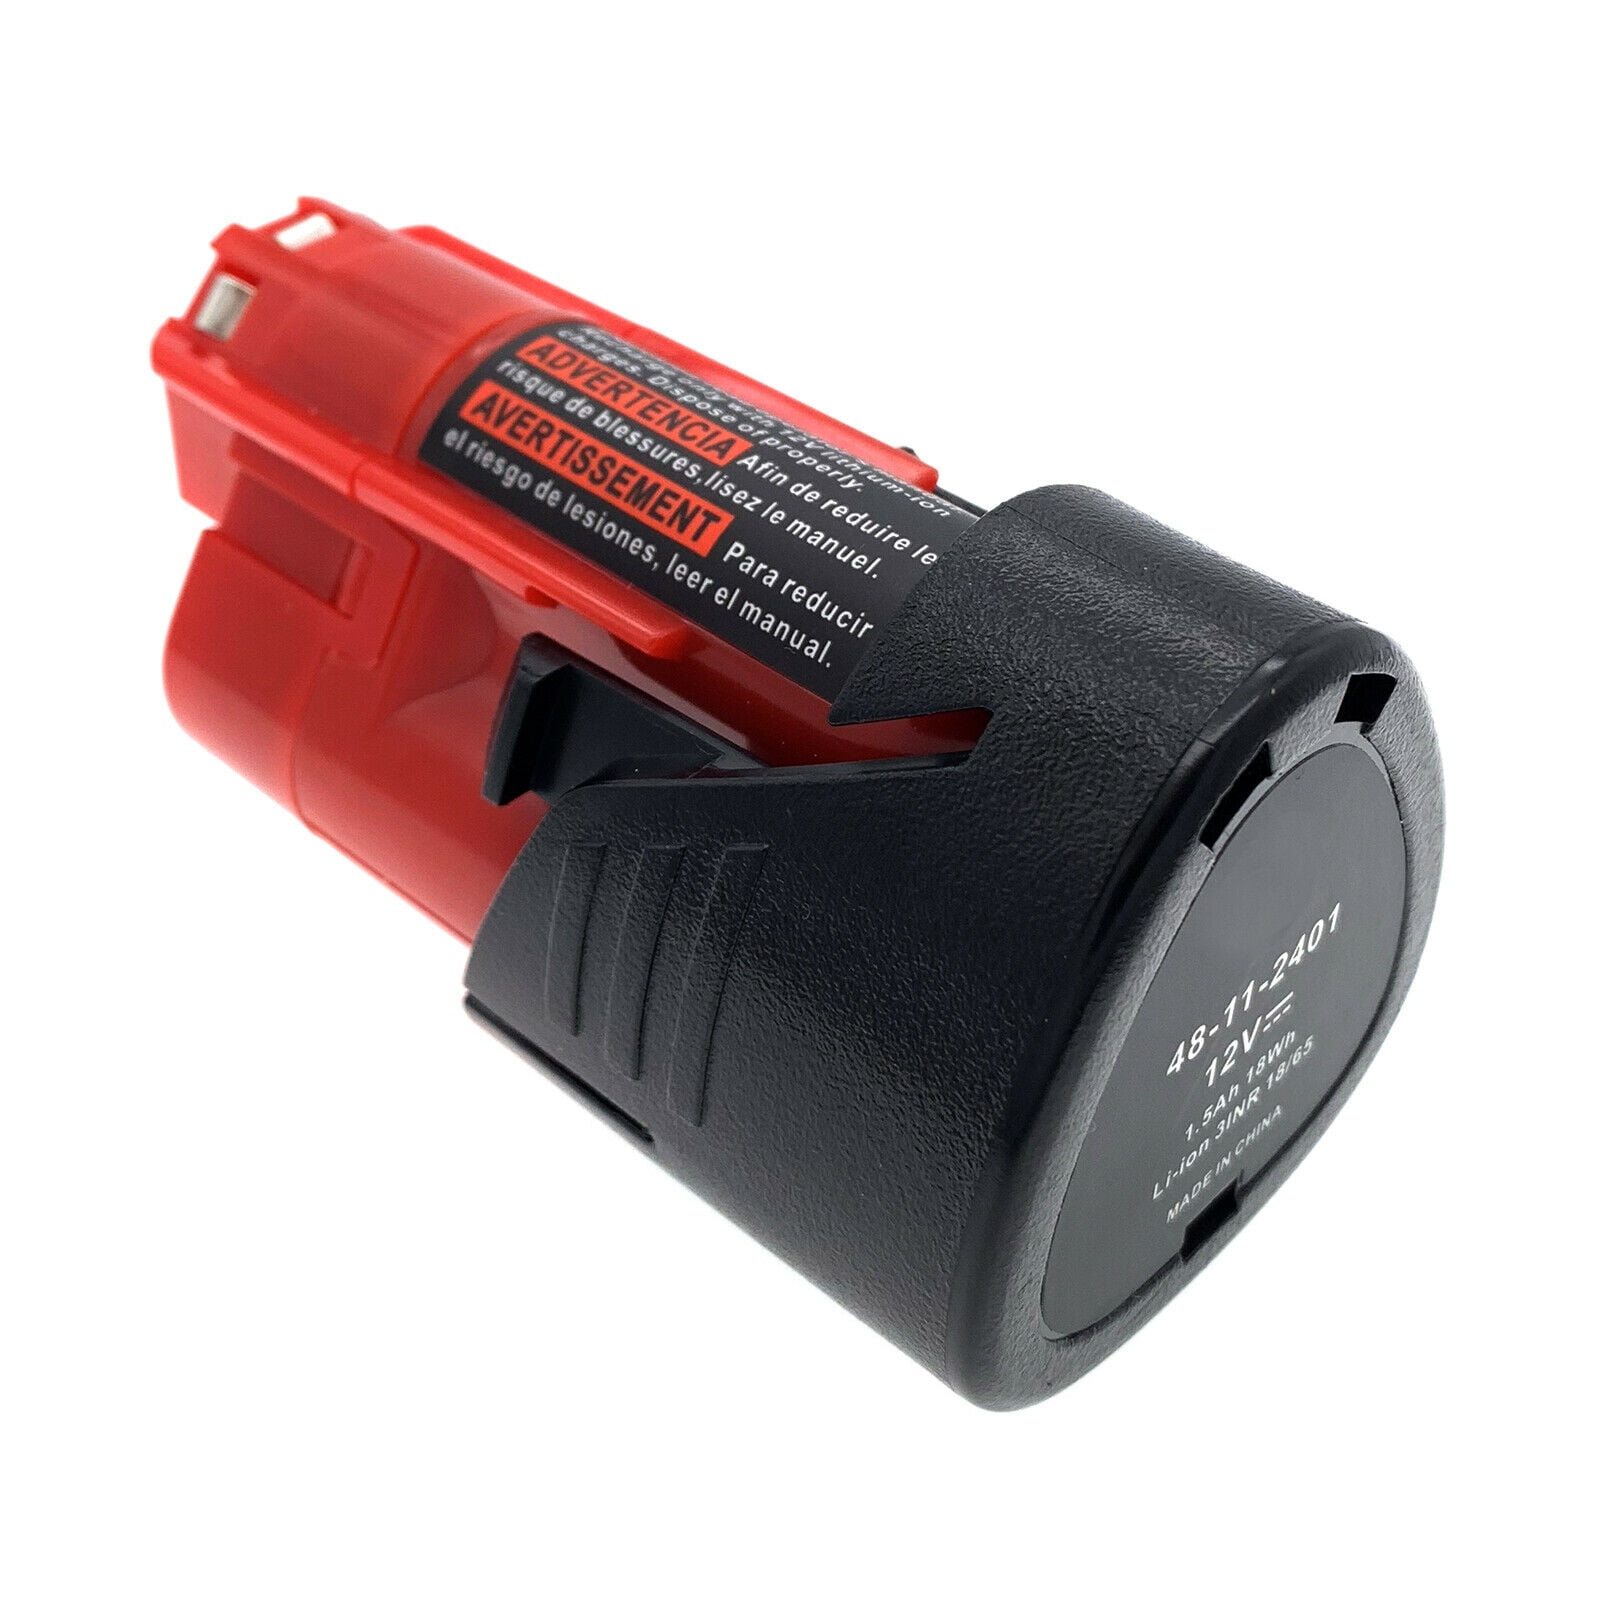 6.0AH High Capacity Battery & Charger For Milwaukee M18 M12 48-11-1860 48-11-240 